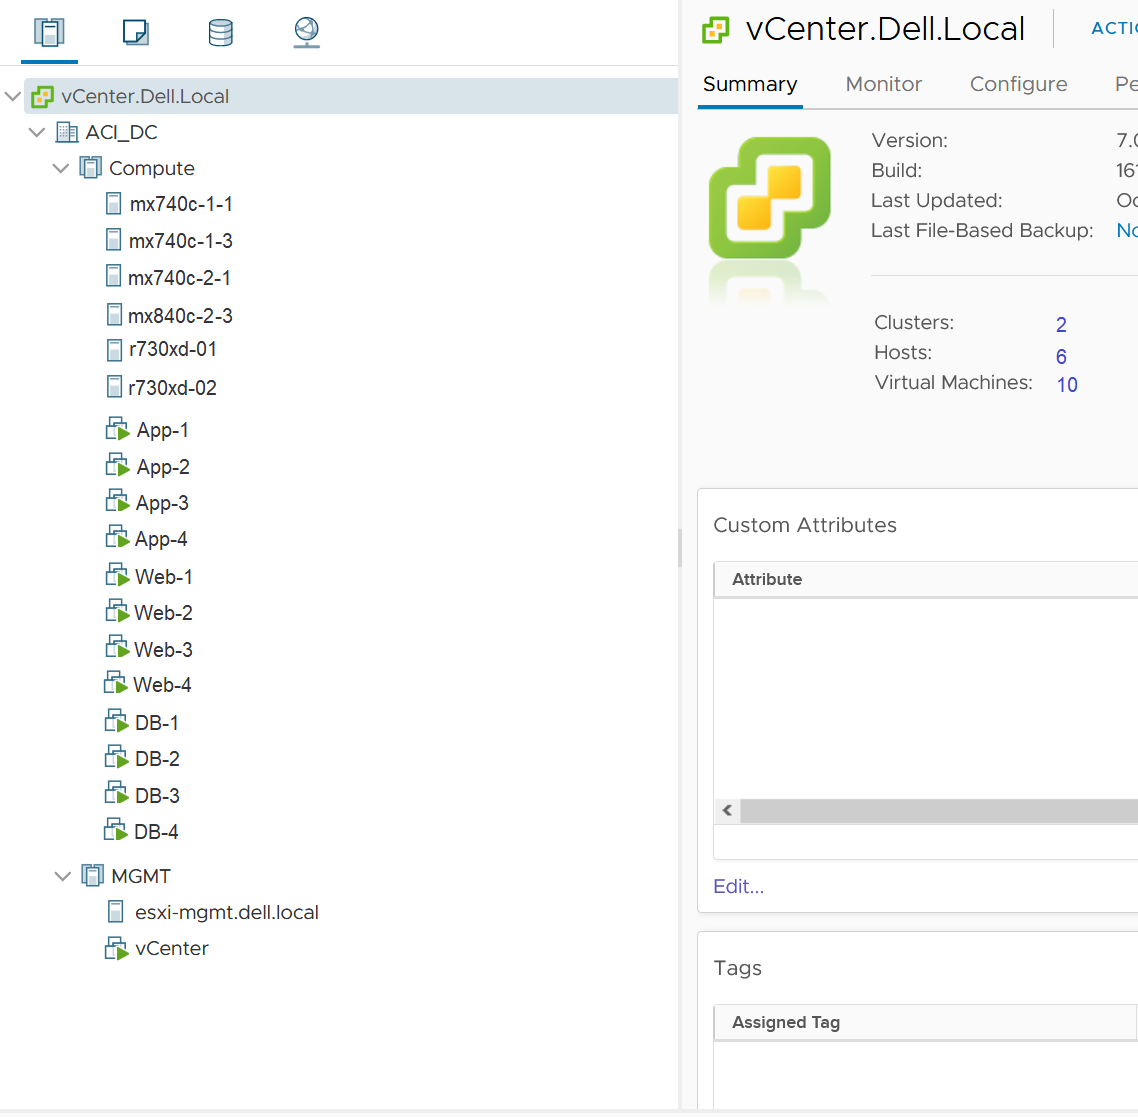 Hosts and VMs used in the validated environment in a single vSphere cluster